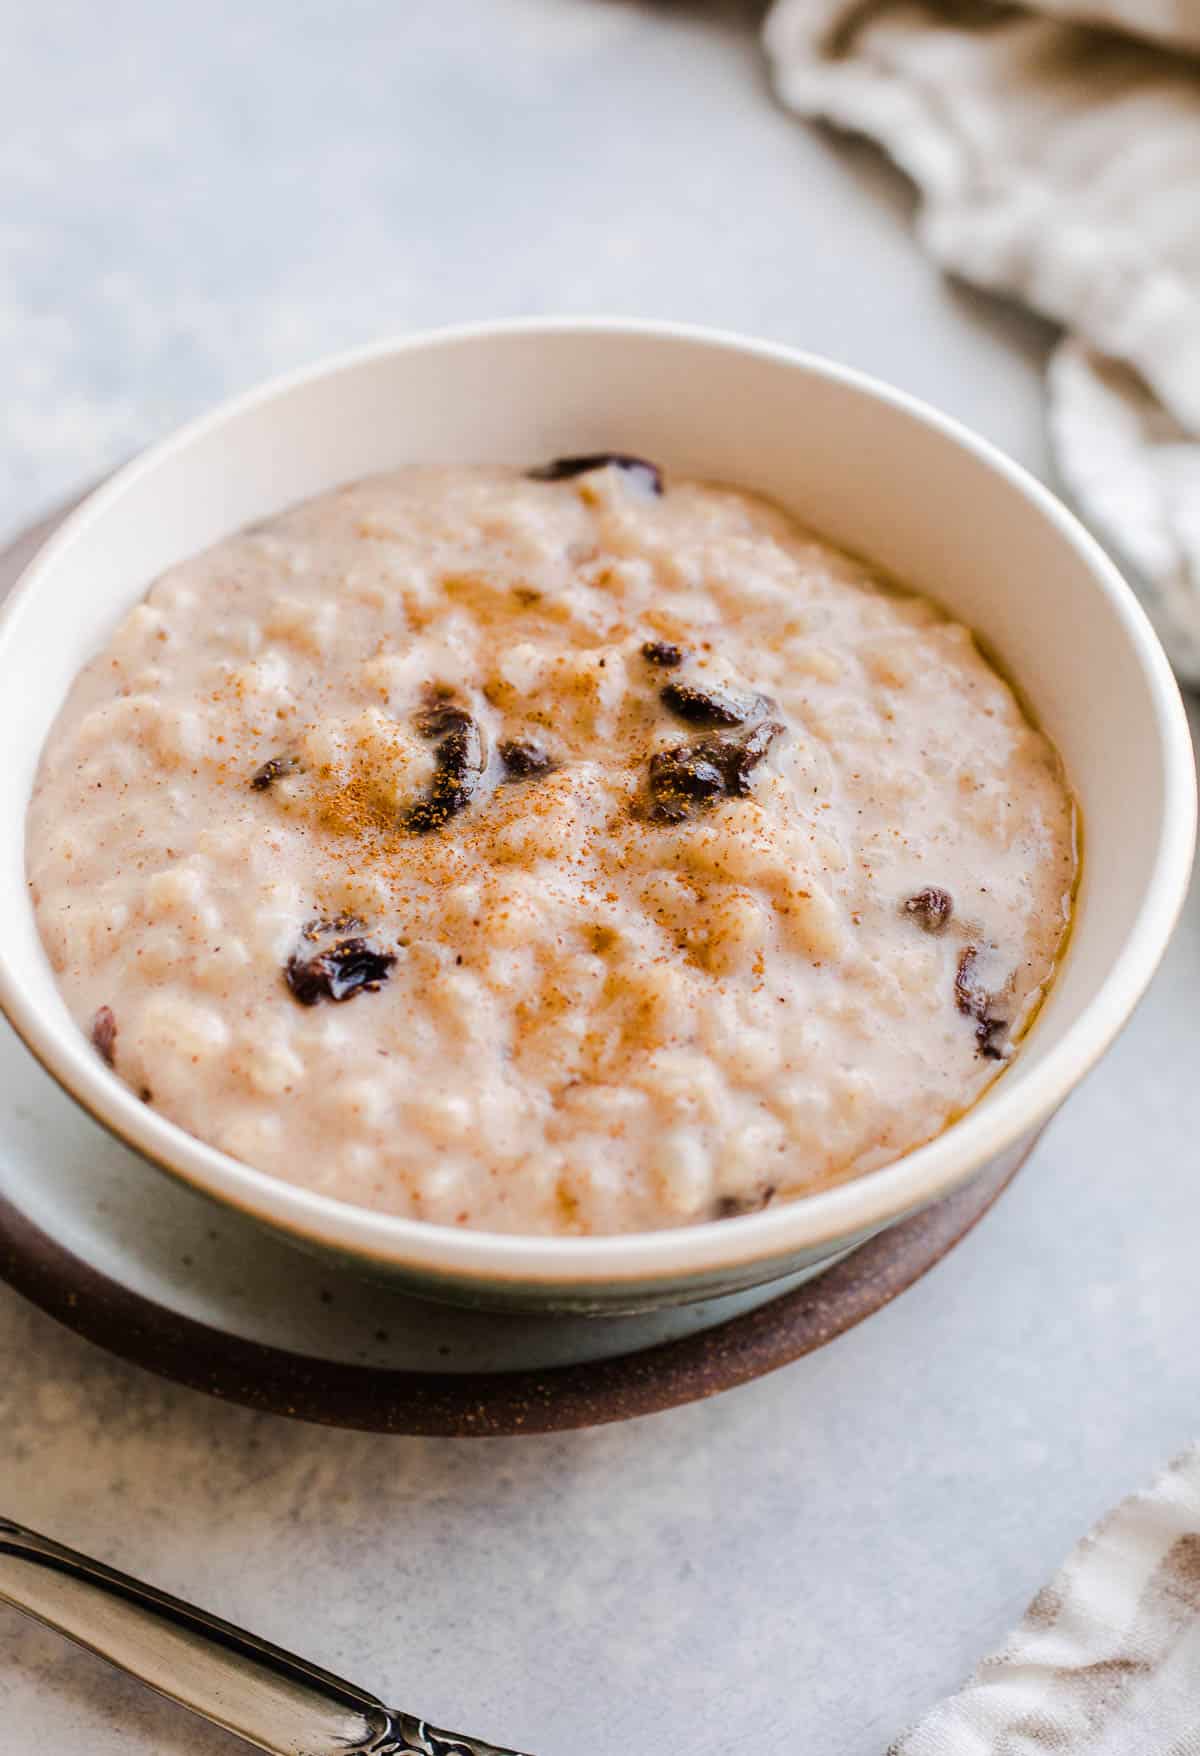 Rice pudding in green bowl with raisins and syrup on top.